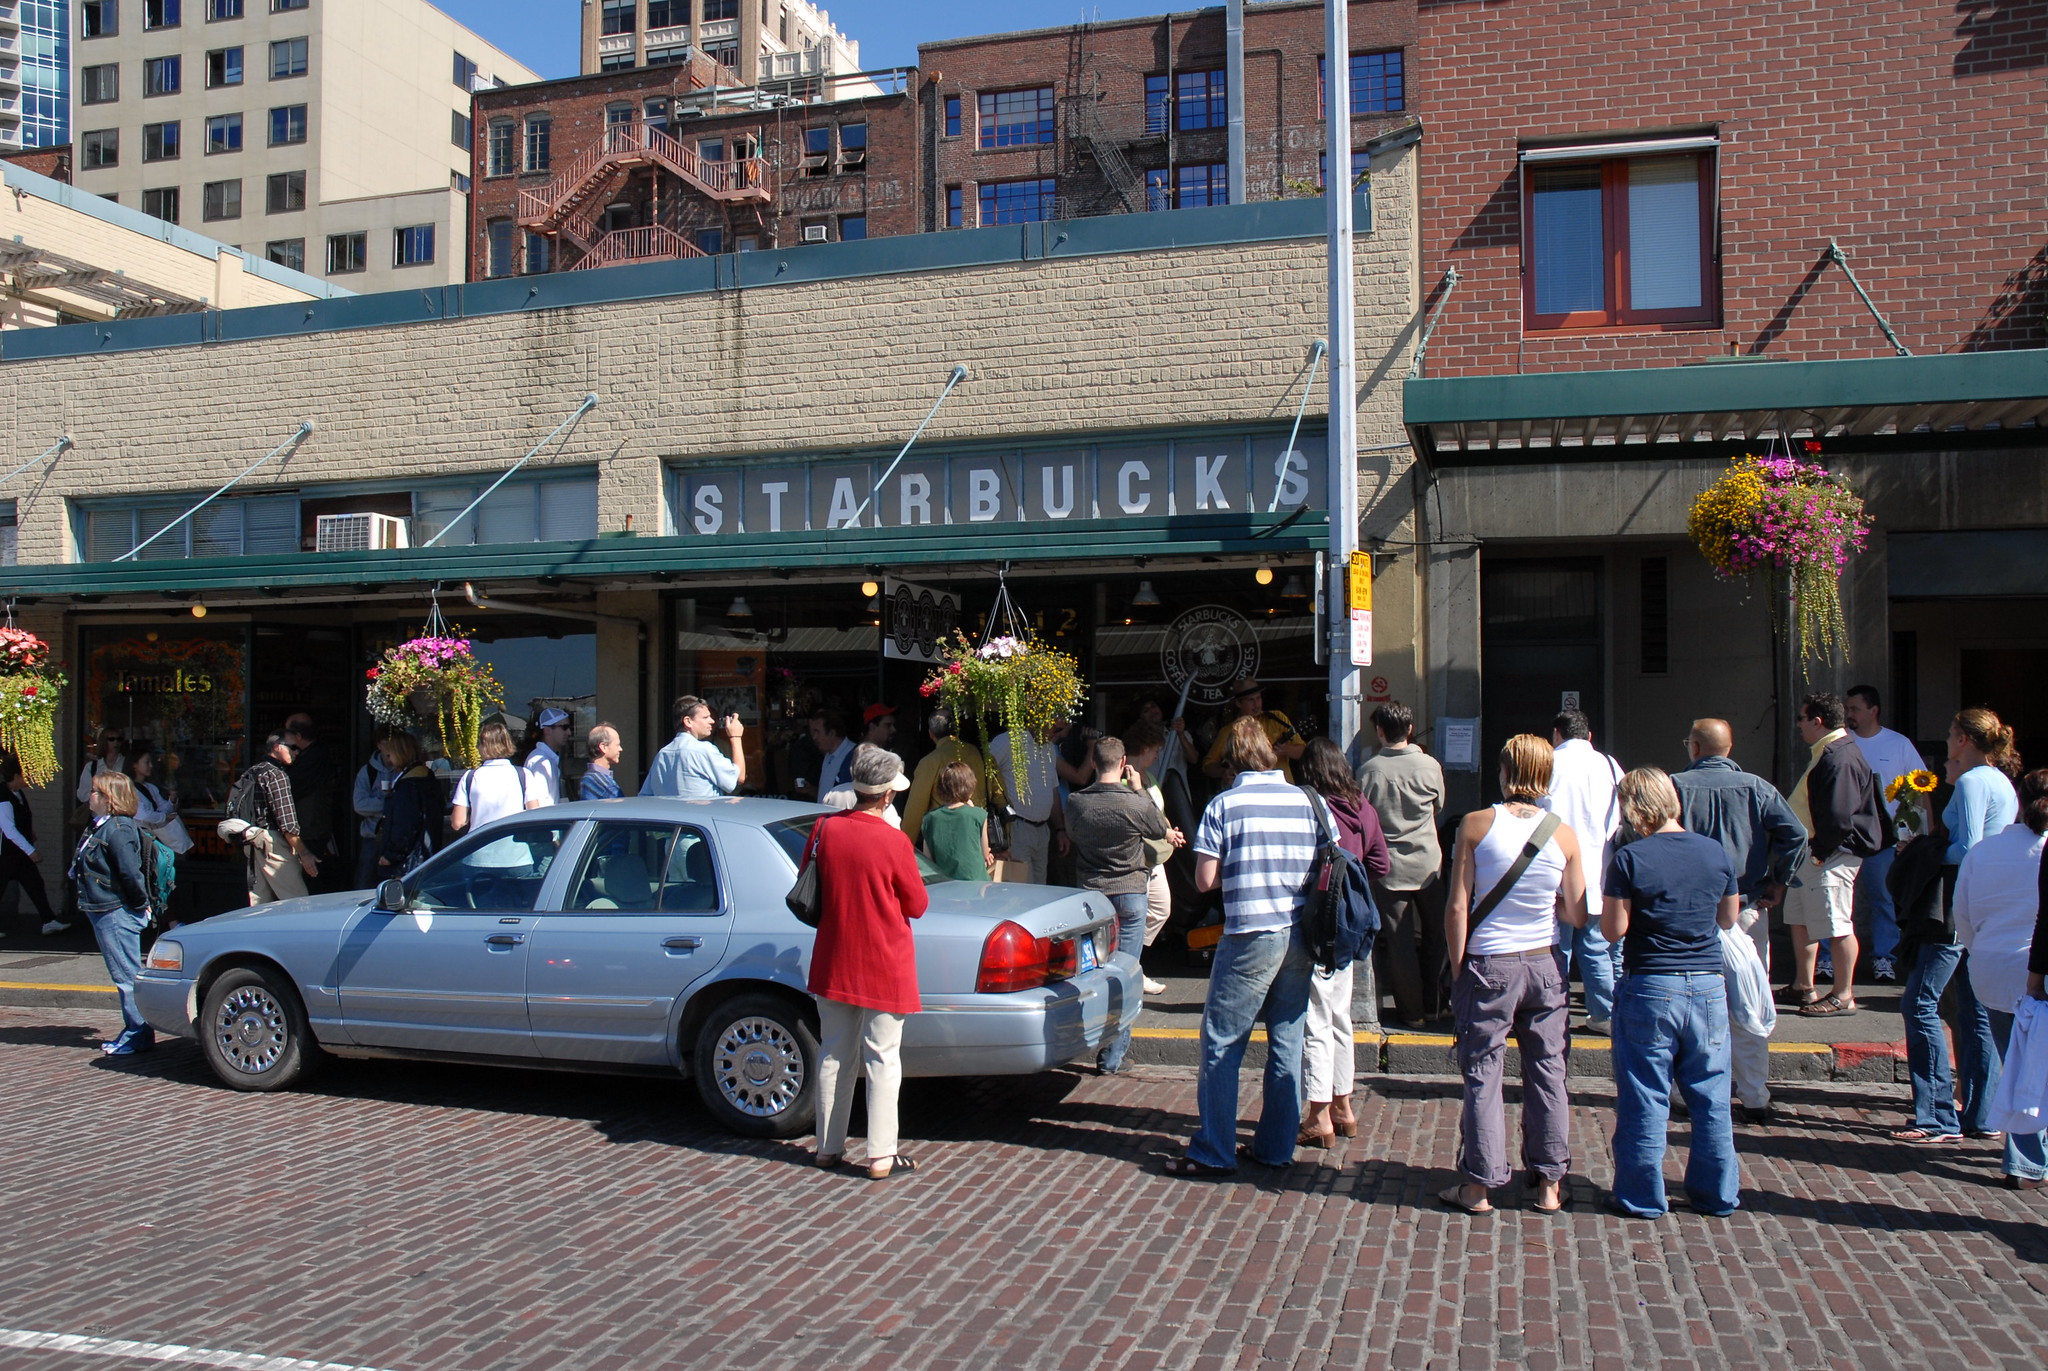 The original Starbucks in Pike Place, Seattle